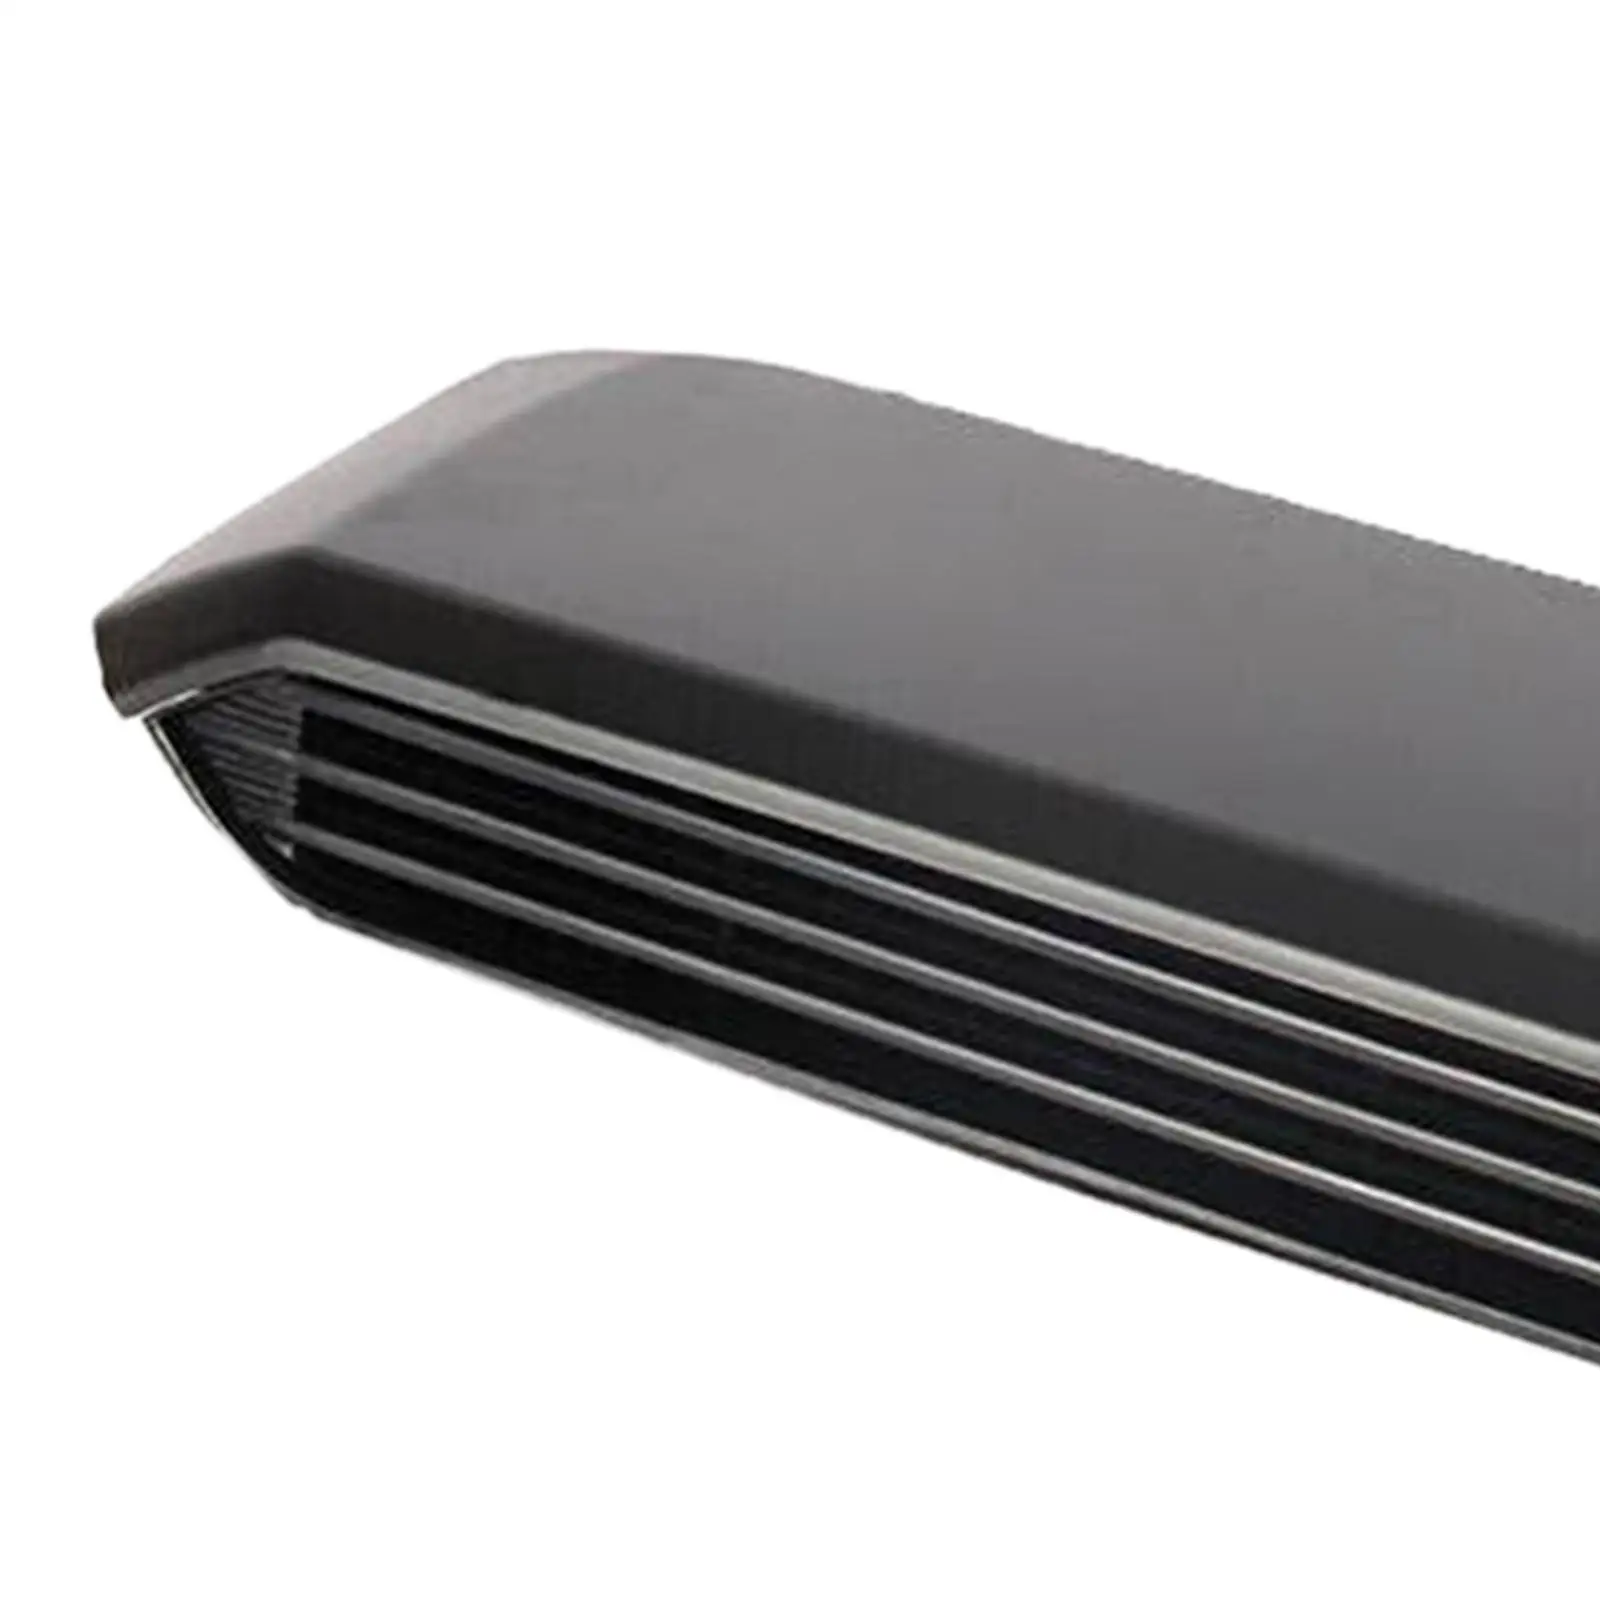 76181-04900 Premium Durable Hood Scoop Kit for Toyota for tacoma 2016-2022